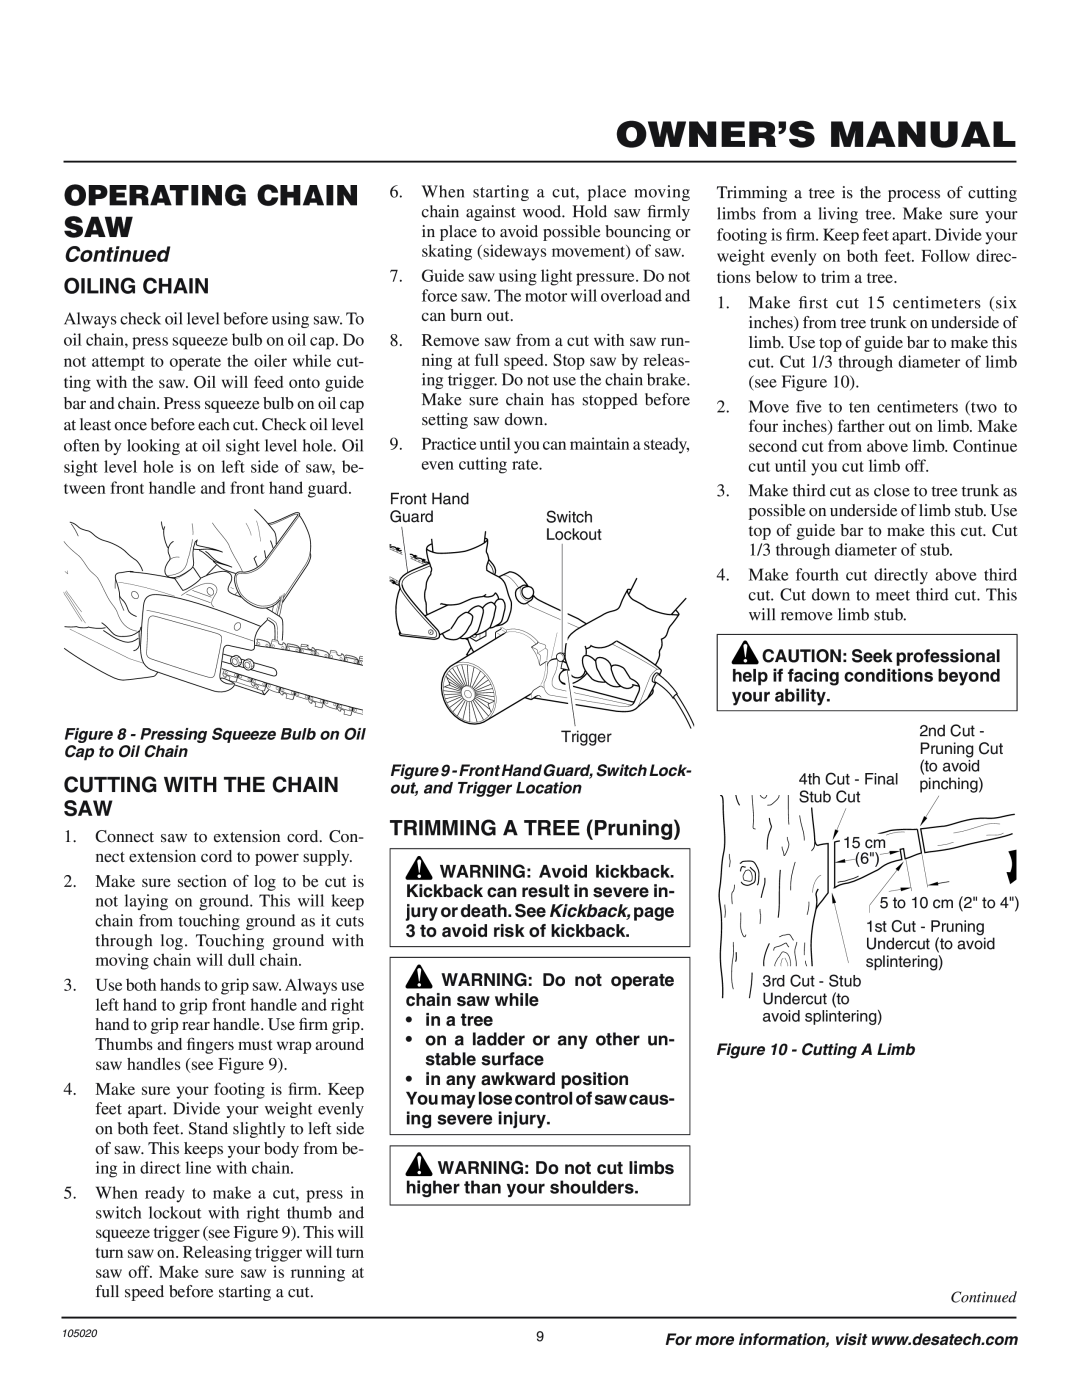 Desa EL-7 16-inch Oiling Chain, Cutting With The Chain Saw, TRIMMING A TREE Pruning, Operating Chain Saw, Continued 